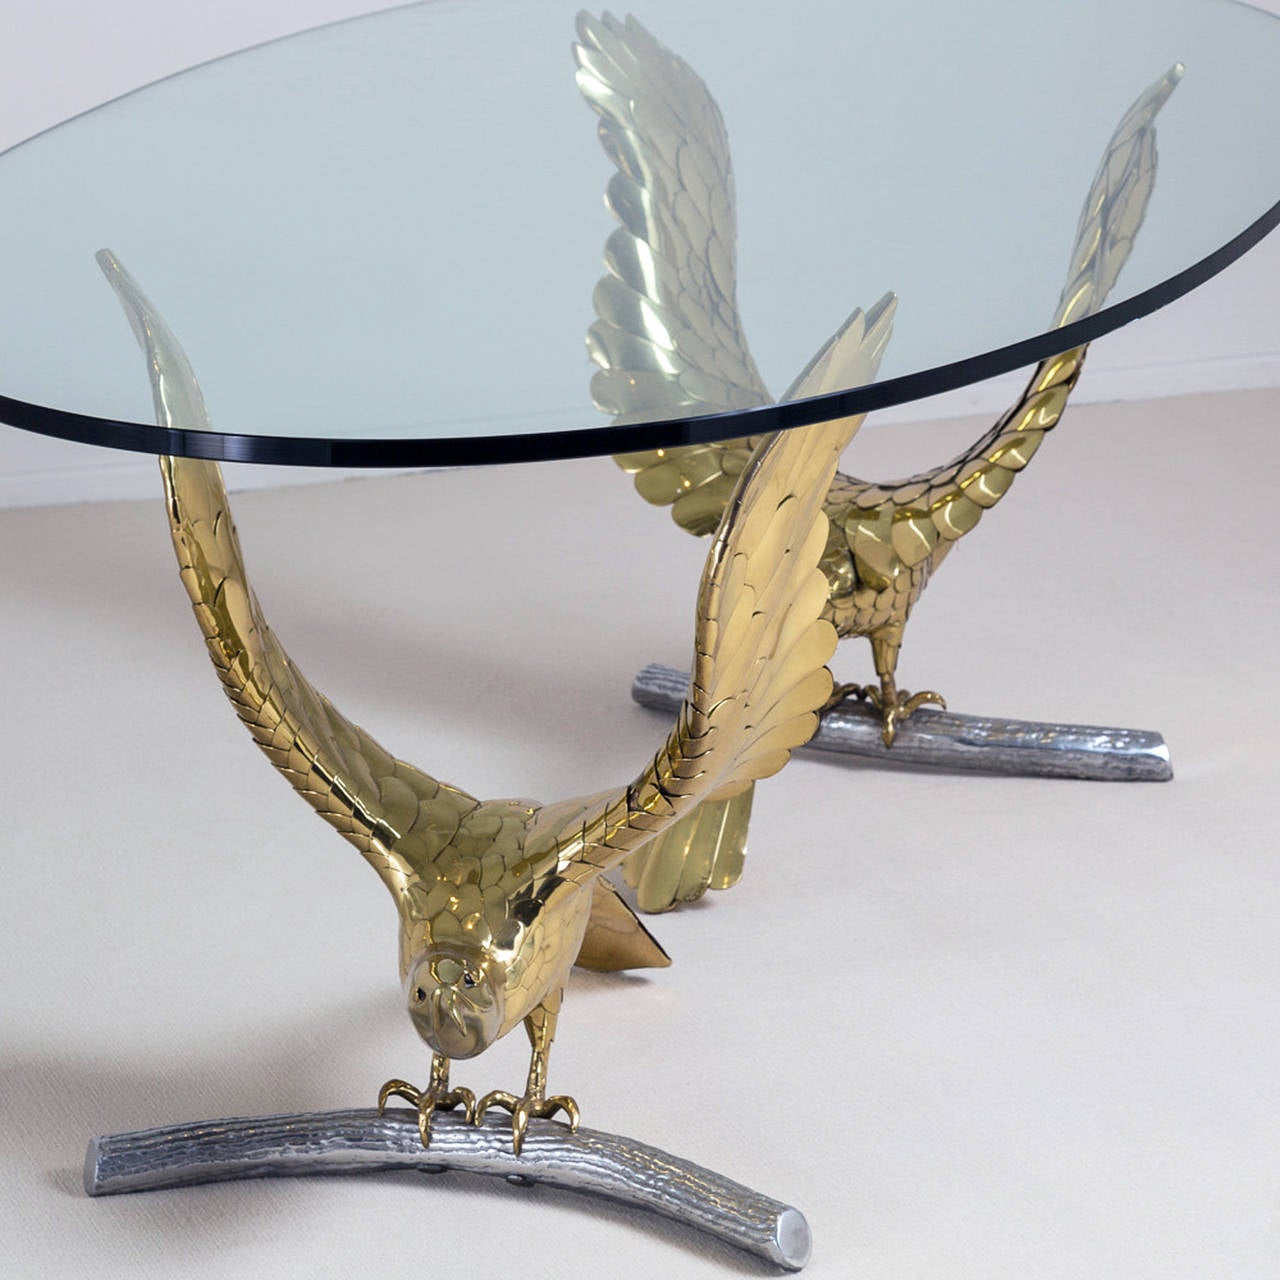 Elegant large dining table by Alain Chervet, handmade in brass and polished wrought iron, circa 1970-1980. Stamped on the base.

Each base measure 28.74 in x 24.41 in x 28.34 in height.
The actual glass top measure 6 ft. 10.7 in but it's possible to